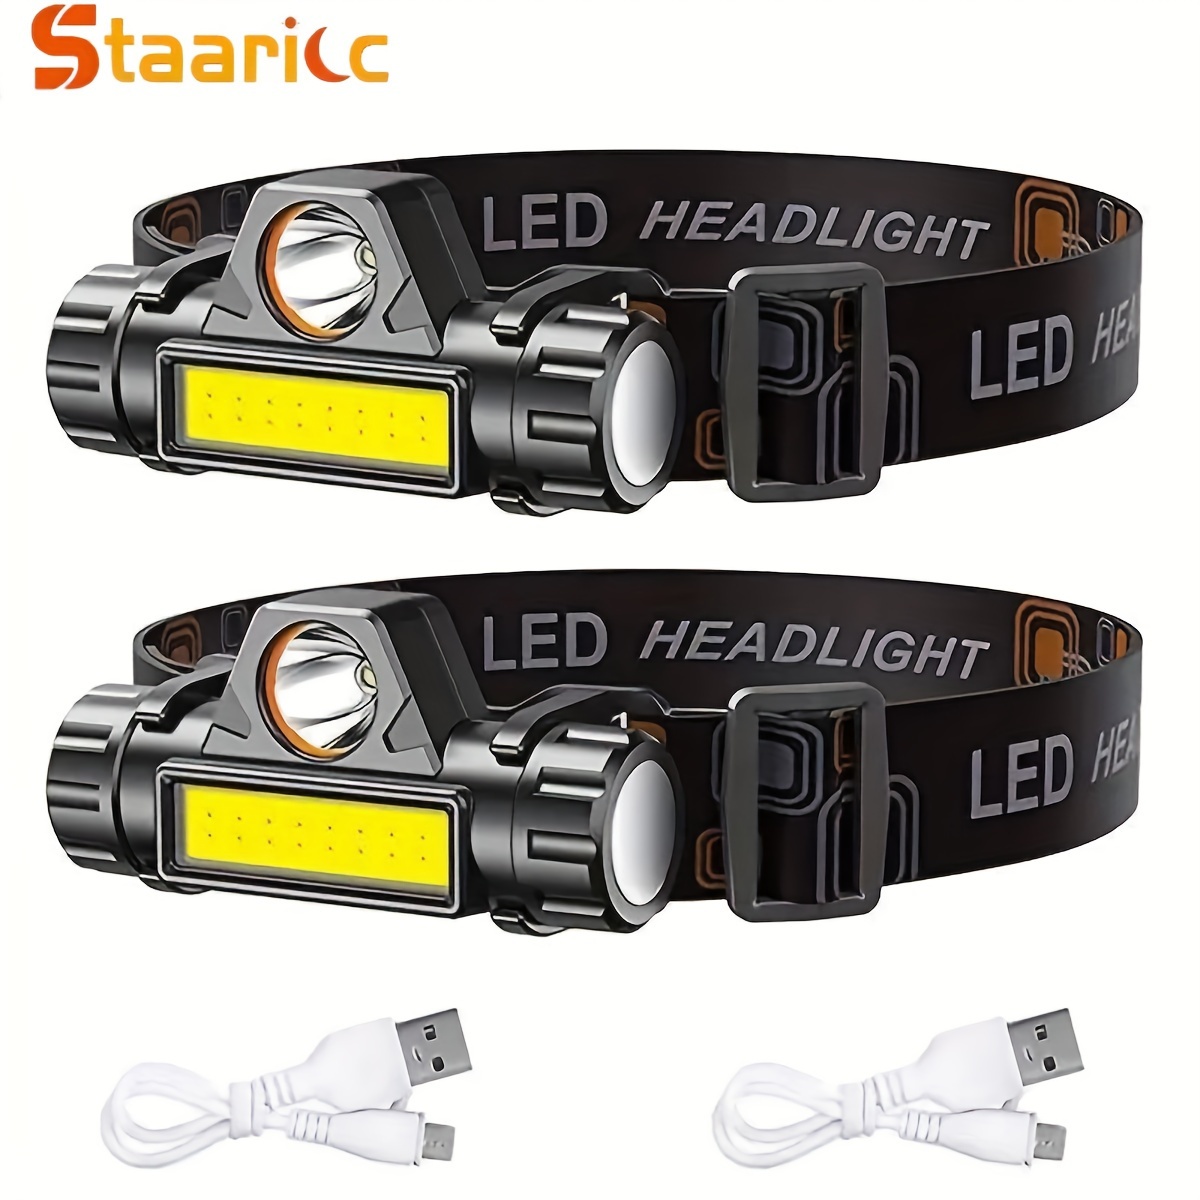 

2pcs Super Bright Rechargeable Portable Headlamp, With Magnetic Powerful Led/cob Flashlight, For Outdoor Camping, Fishing, Hiking, Emergency Rescue